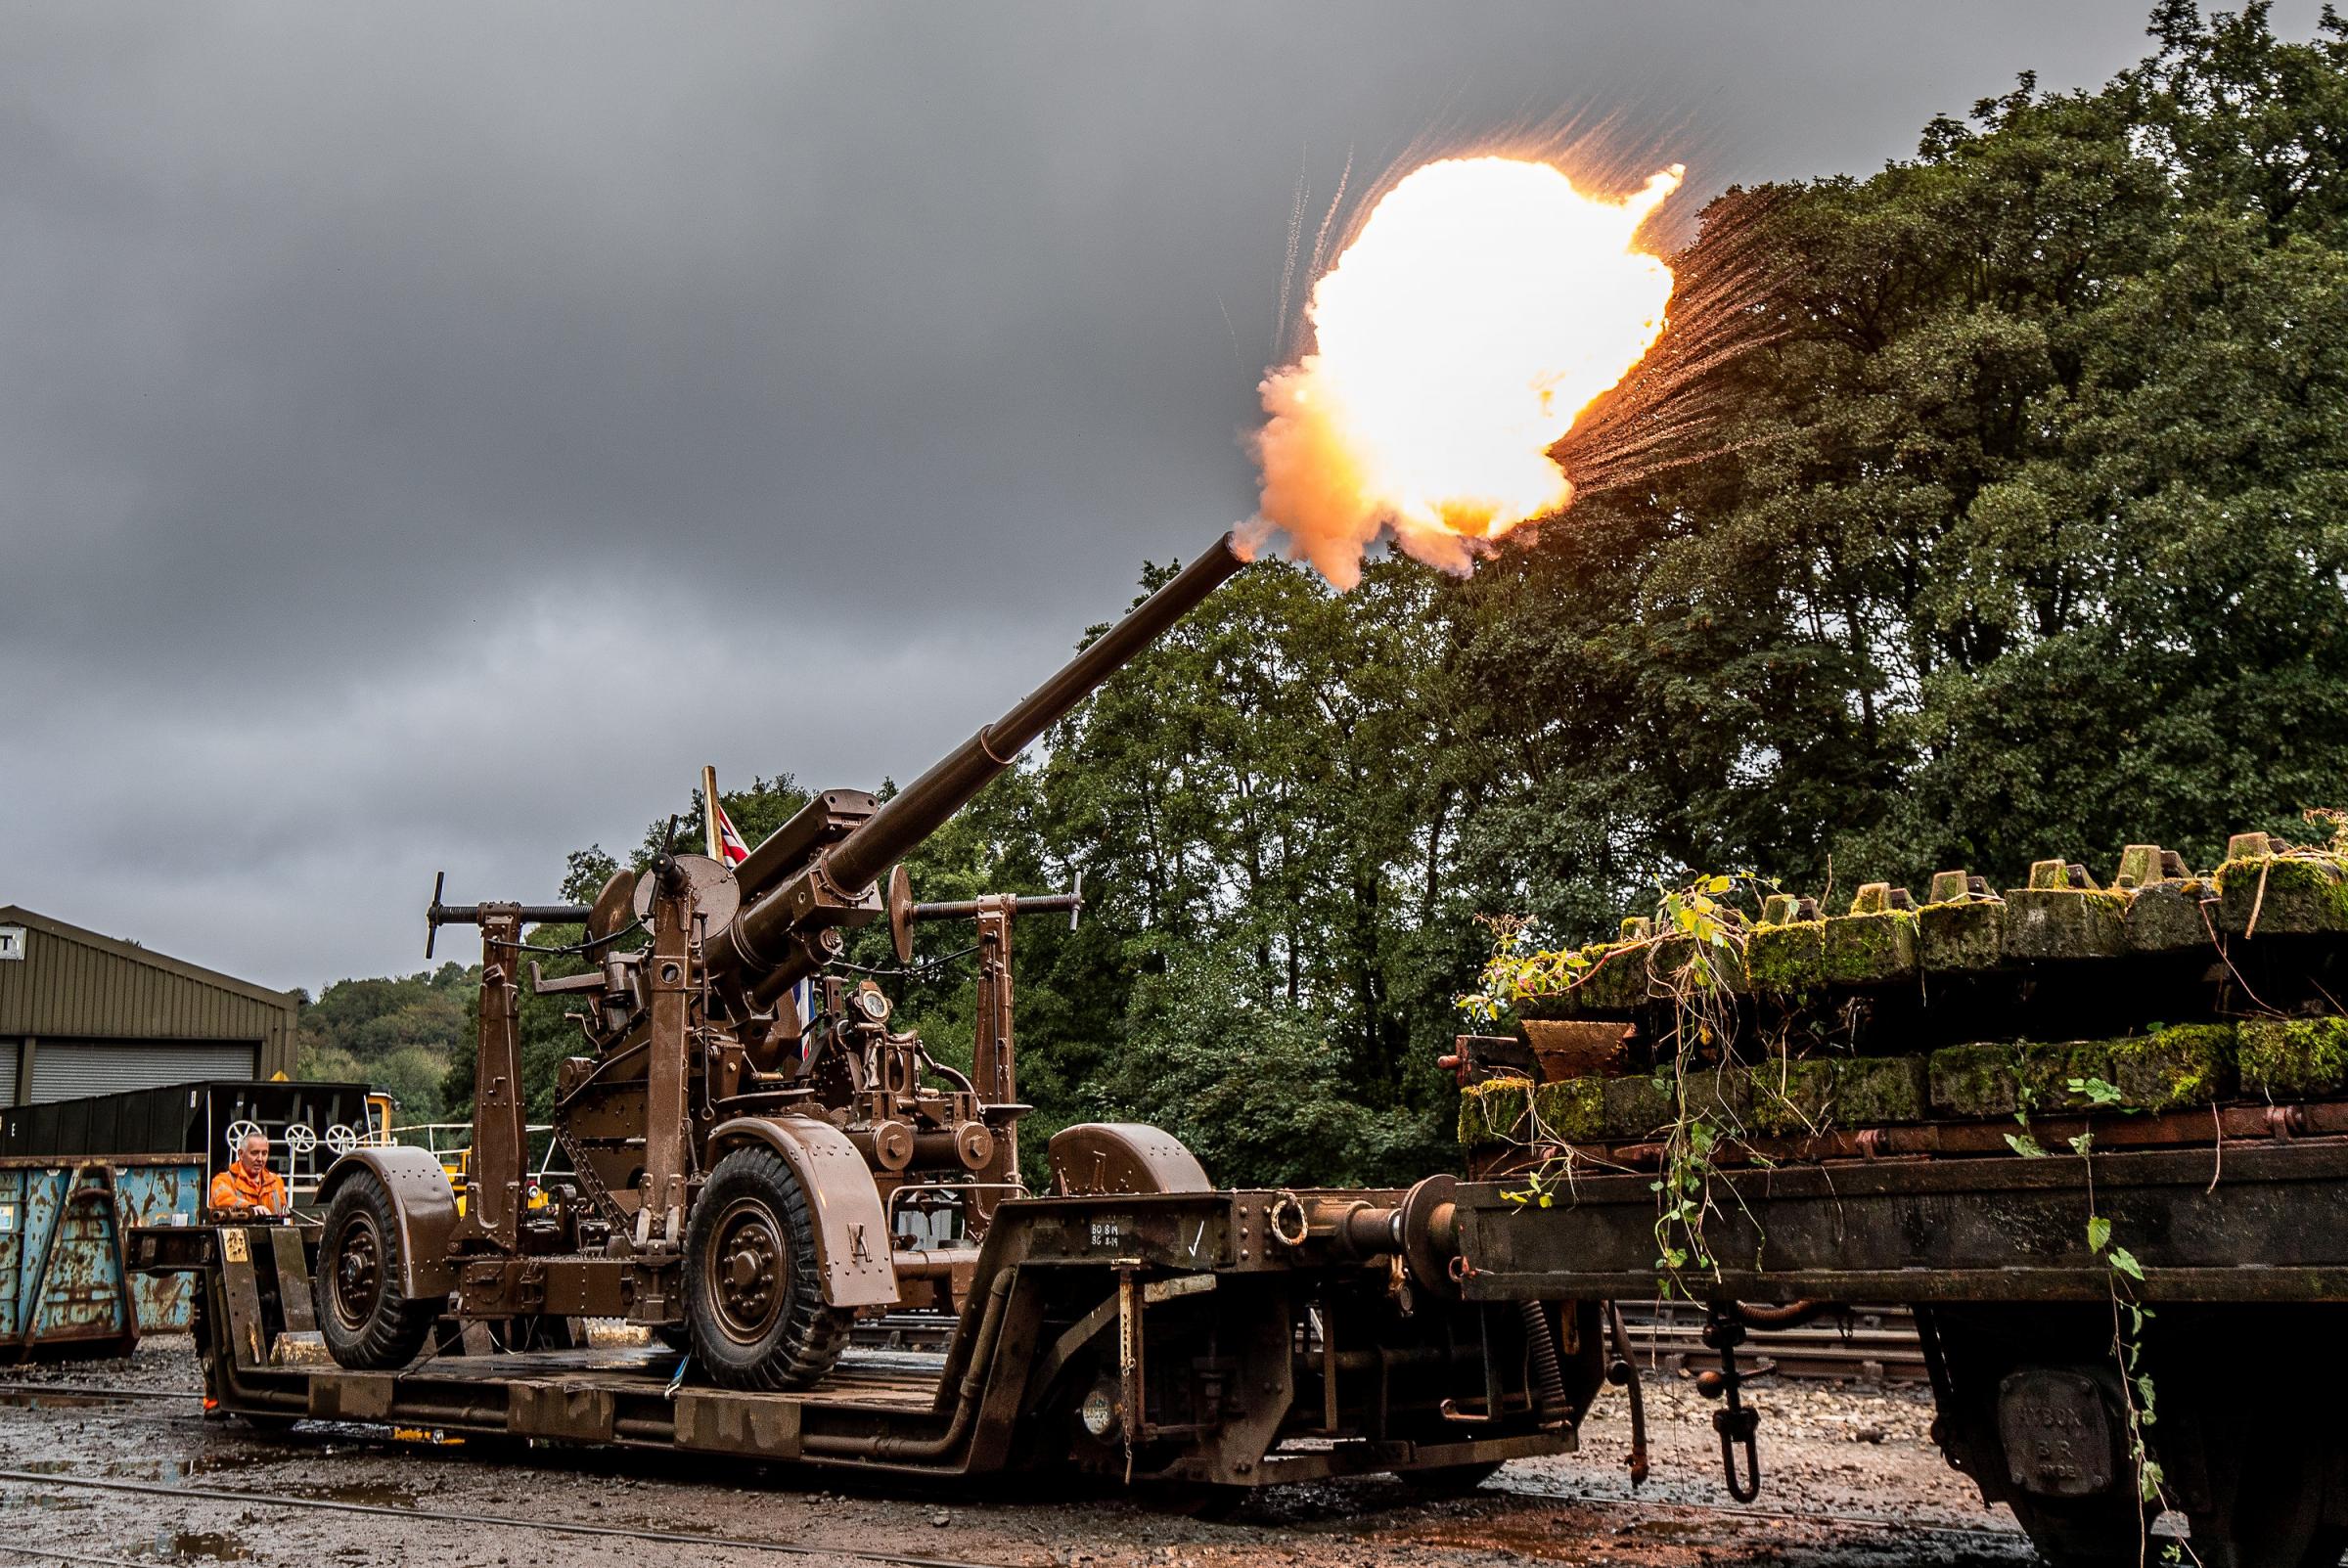 Relive spirit of the Second World War at heritage railway event